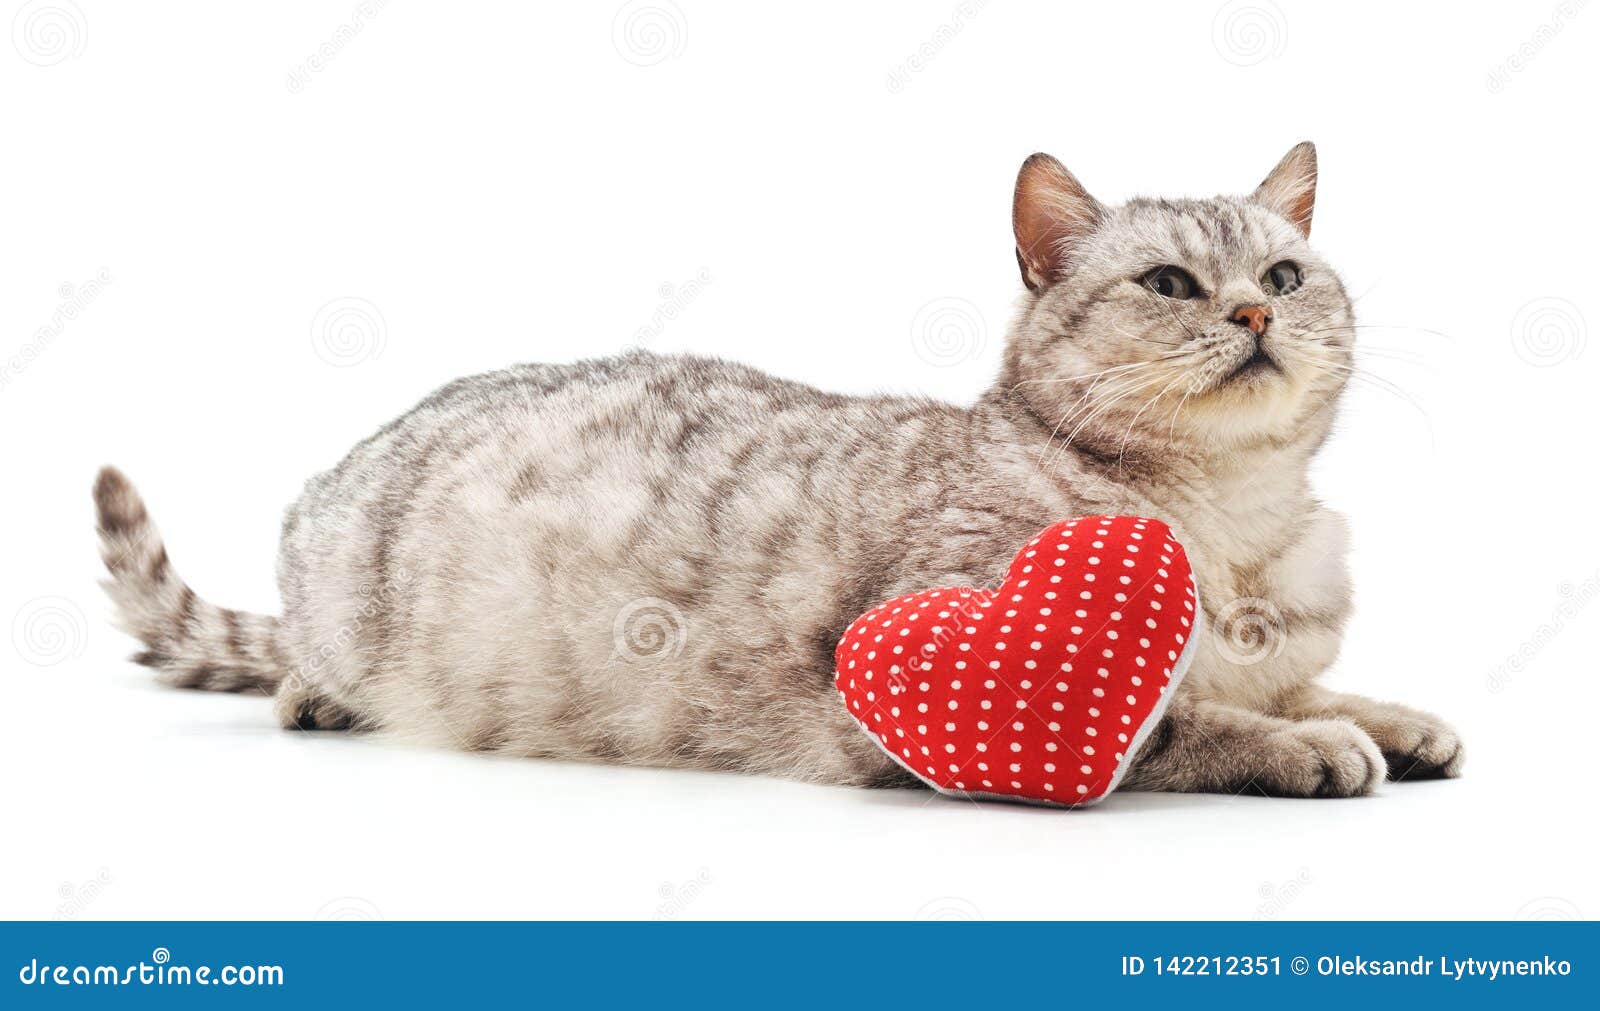 Cat with toy heart stock image. Image of purebred, design - 142212351